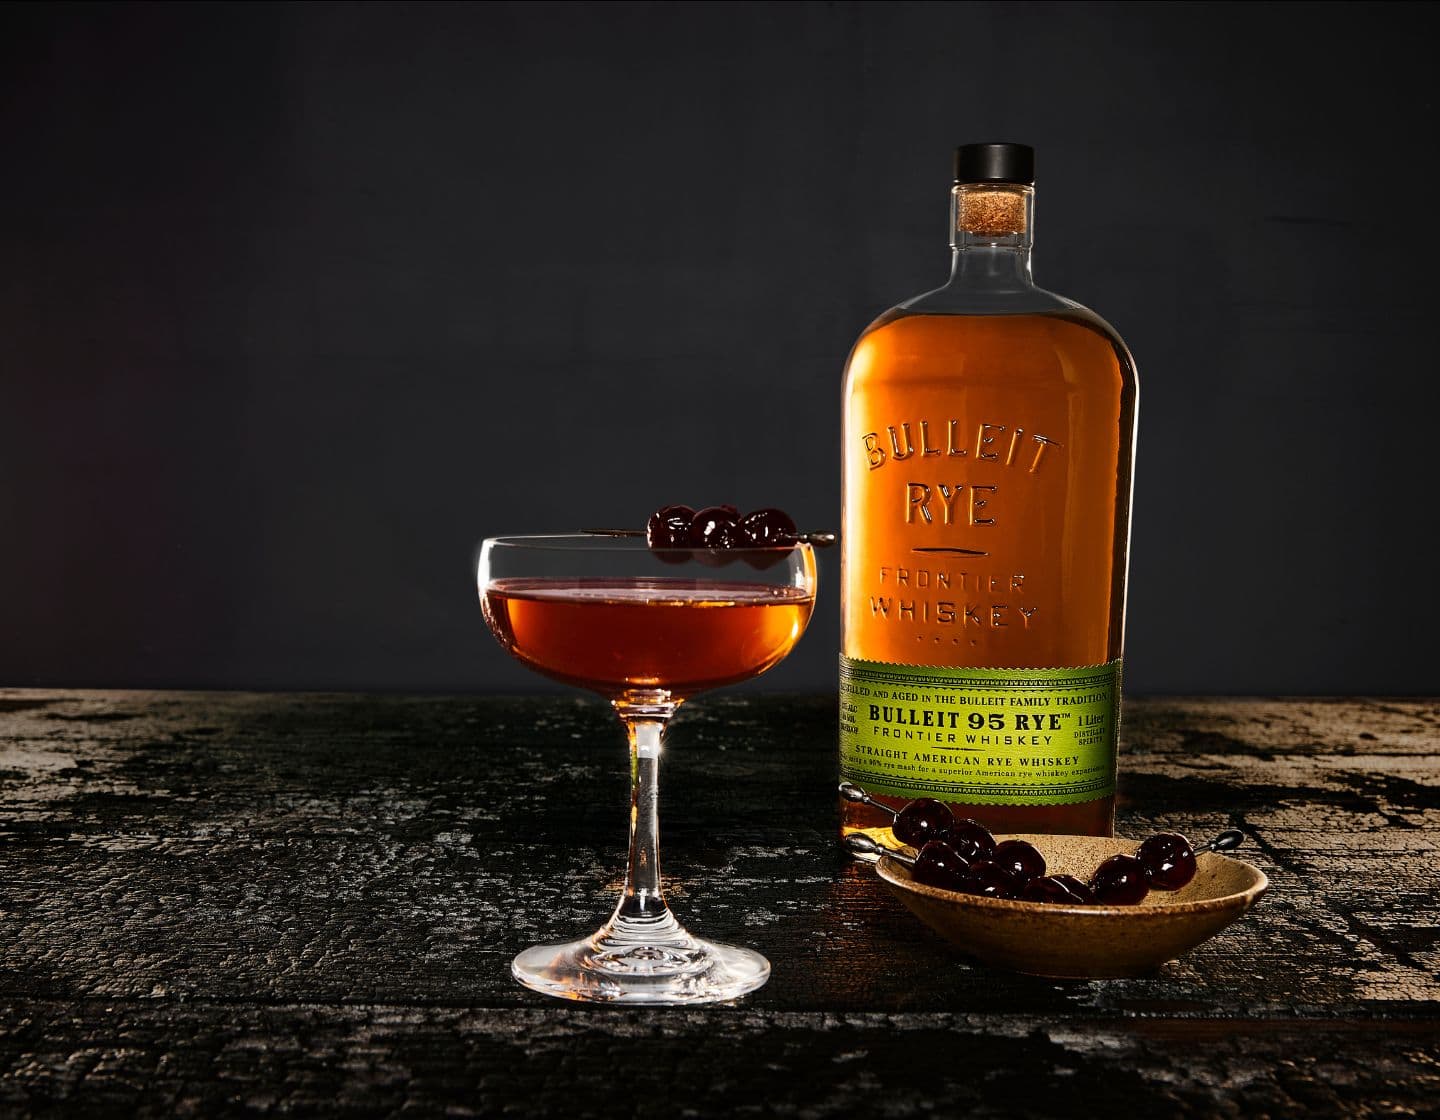 Bulleit_bourbon_bottle_beside_coupe_of_whiskey_cocktail_garnished_with_cherries